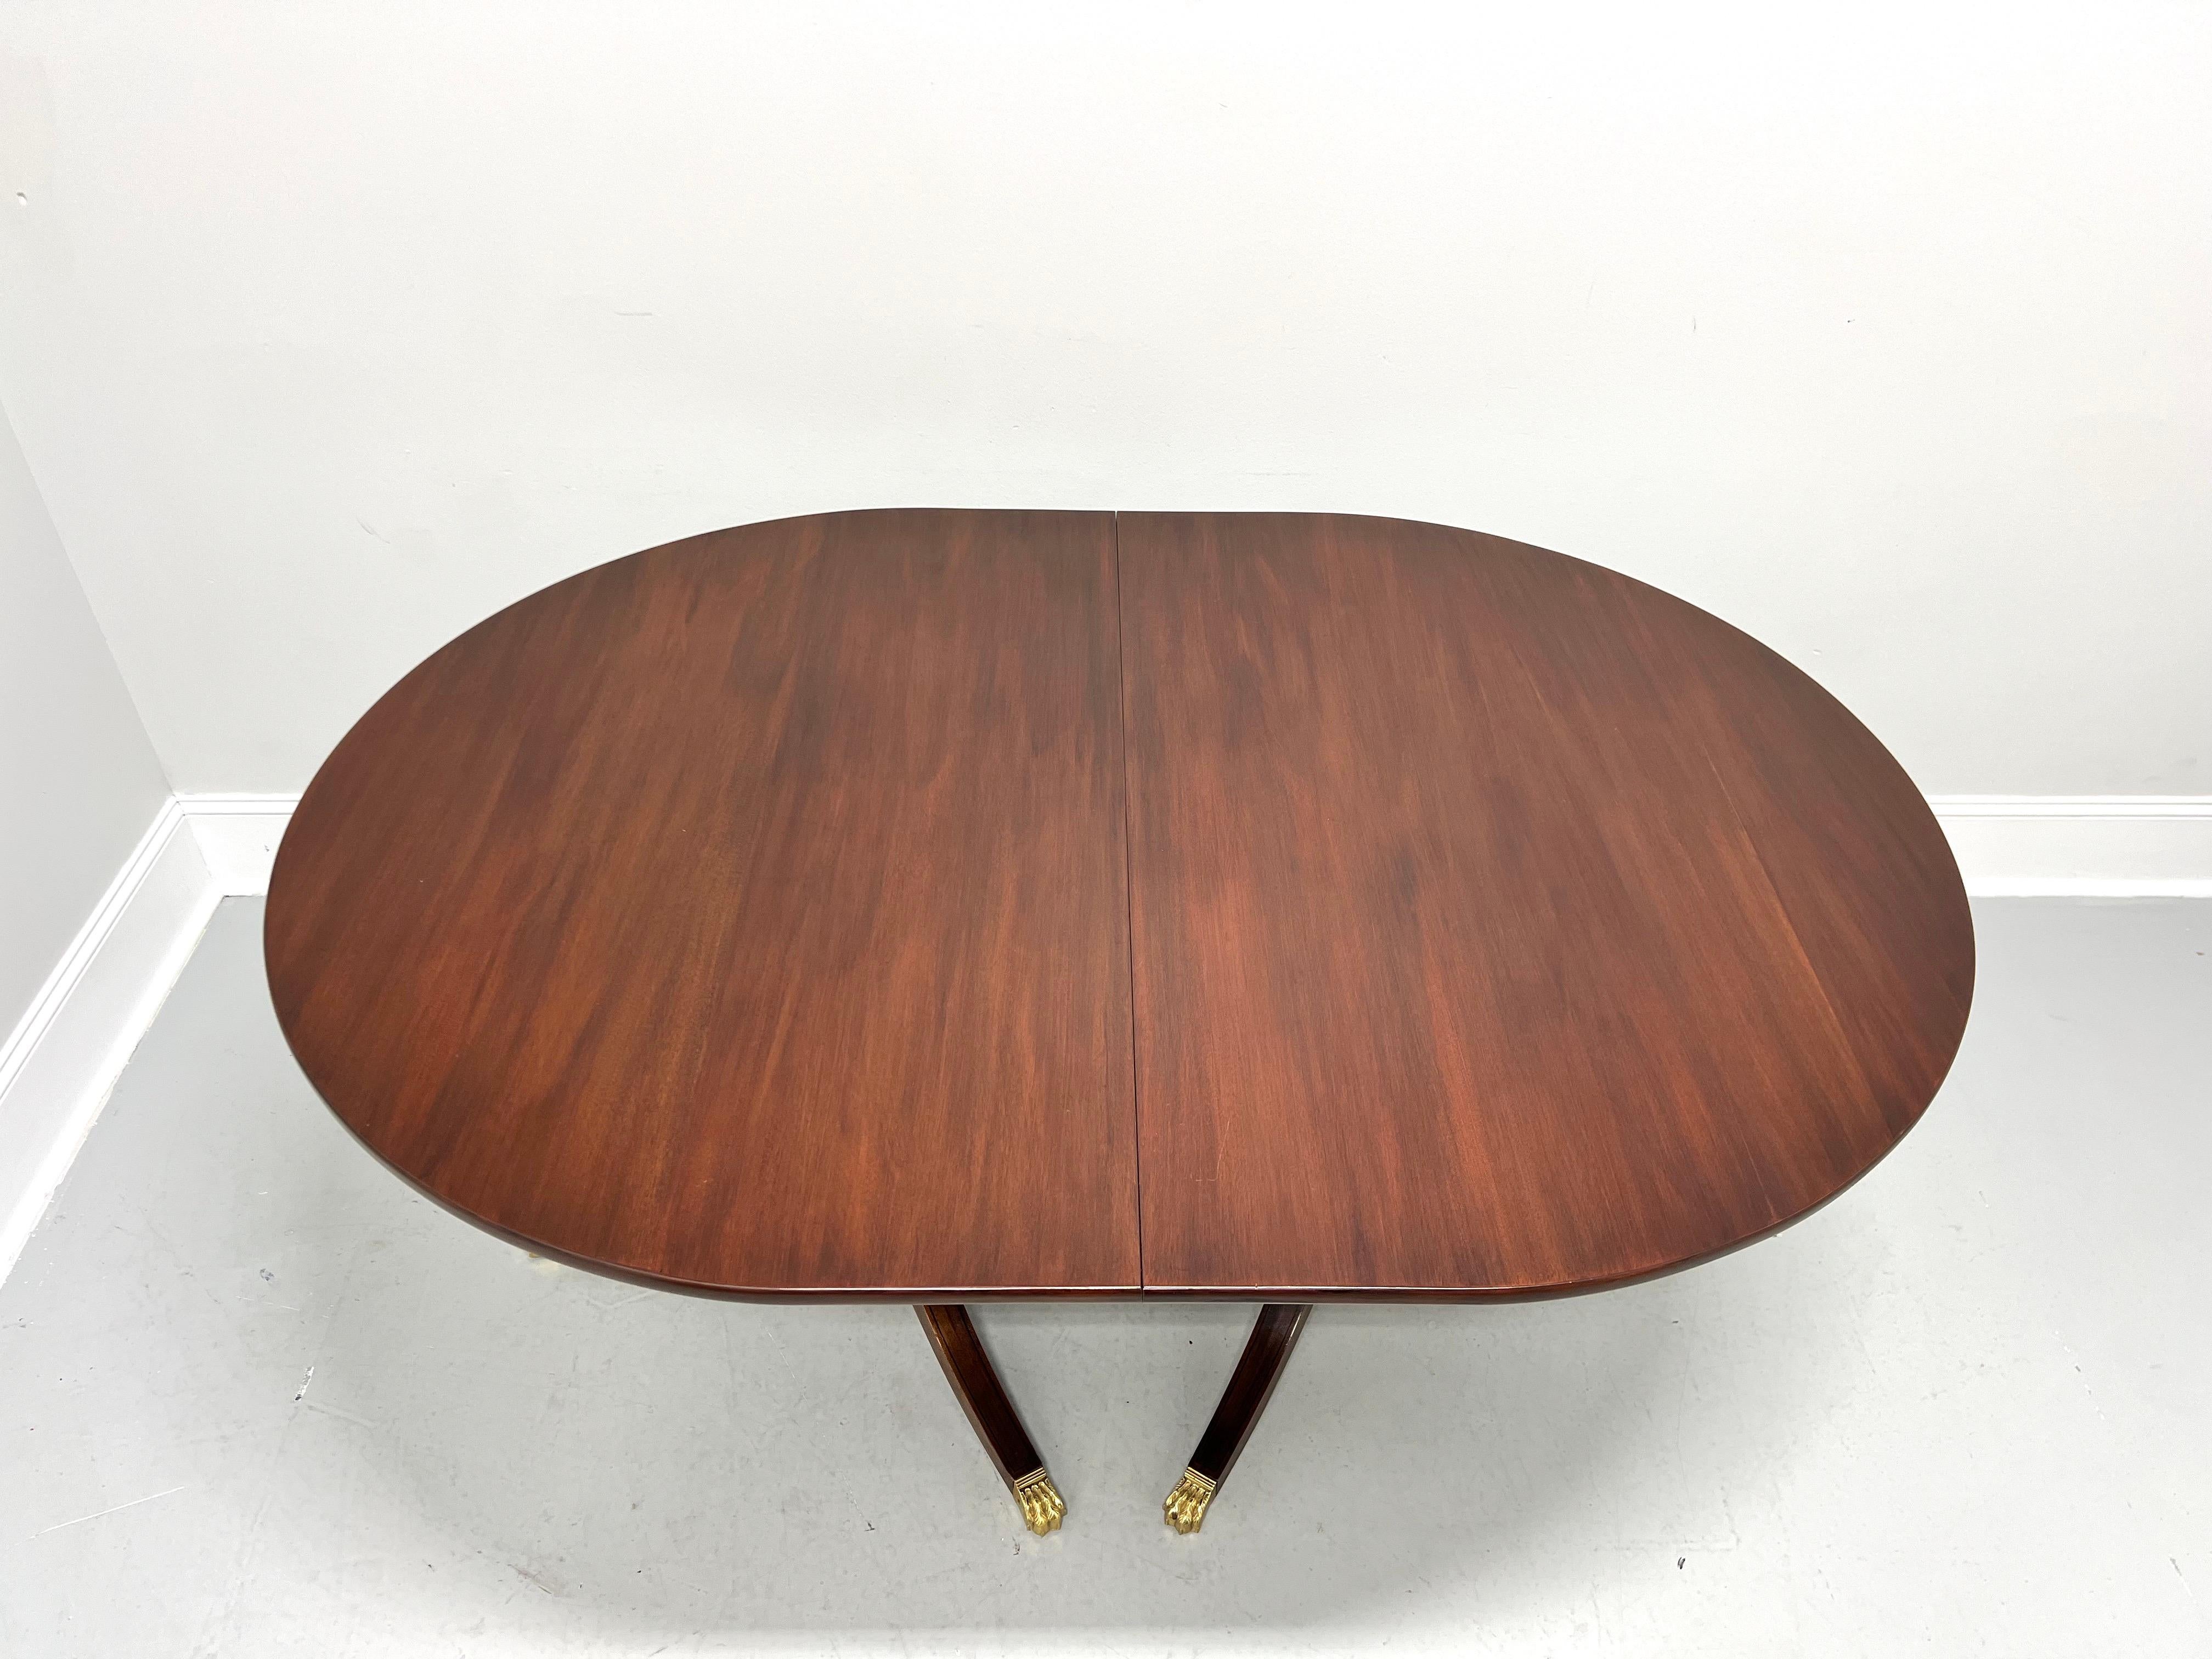 A Traditional style dining table by Henkel Harris, of Winchester, Virginia, USA. Solid mahogany, oval shaped top with a solid edge, two pedestals, each with three legs and brass paw toe caps. Includes four 12 inch extension leaves for placement on